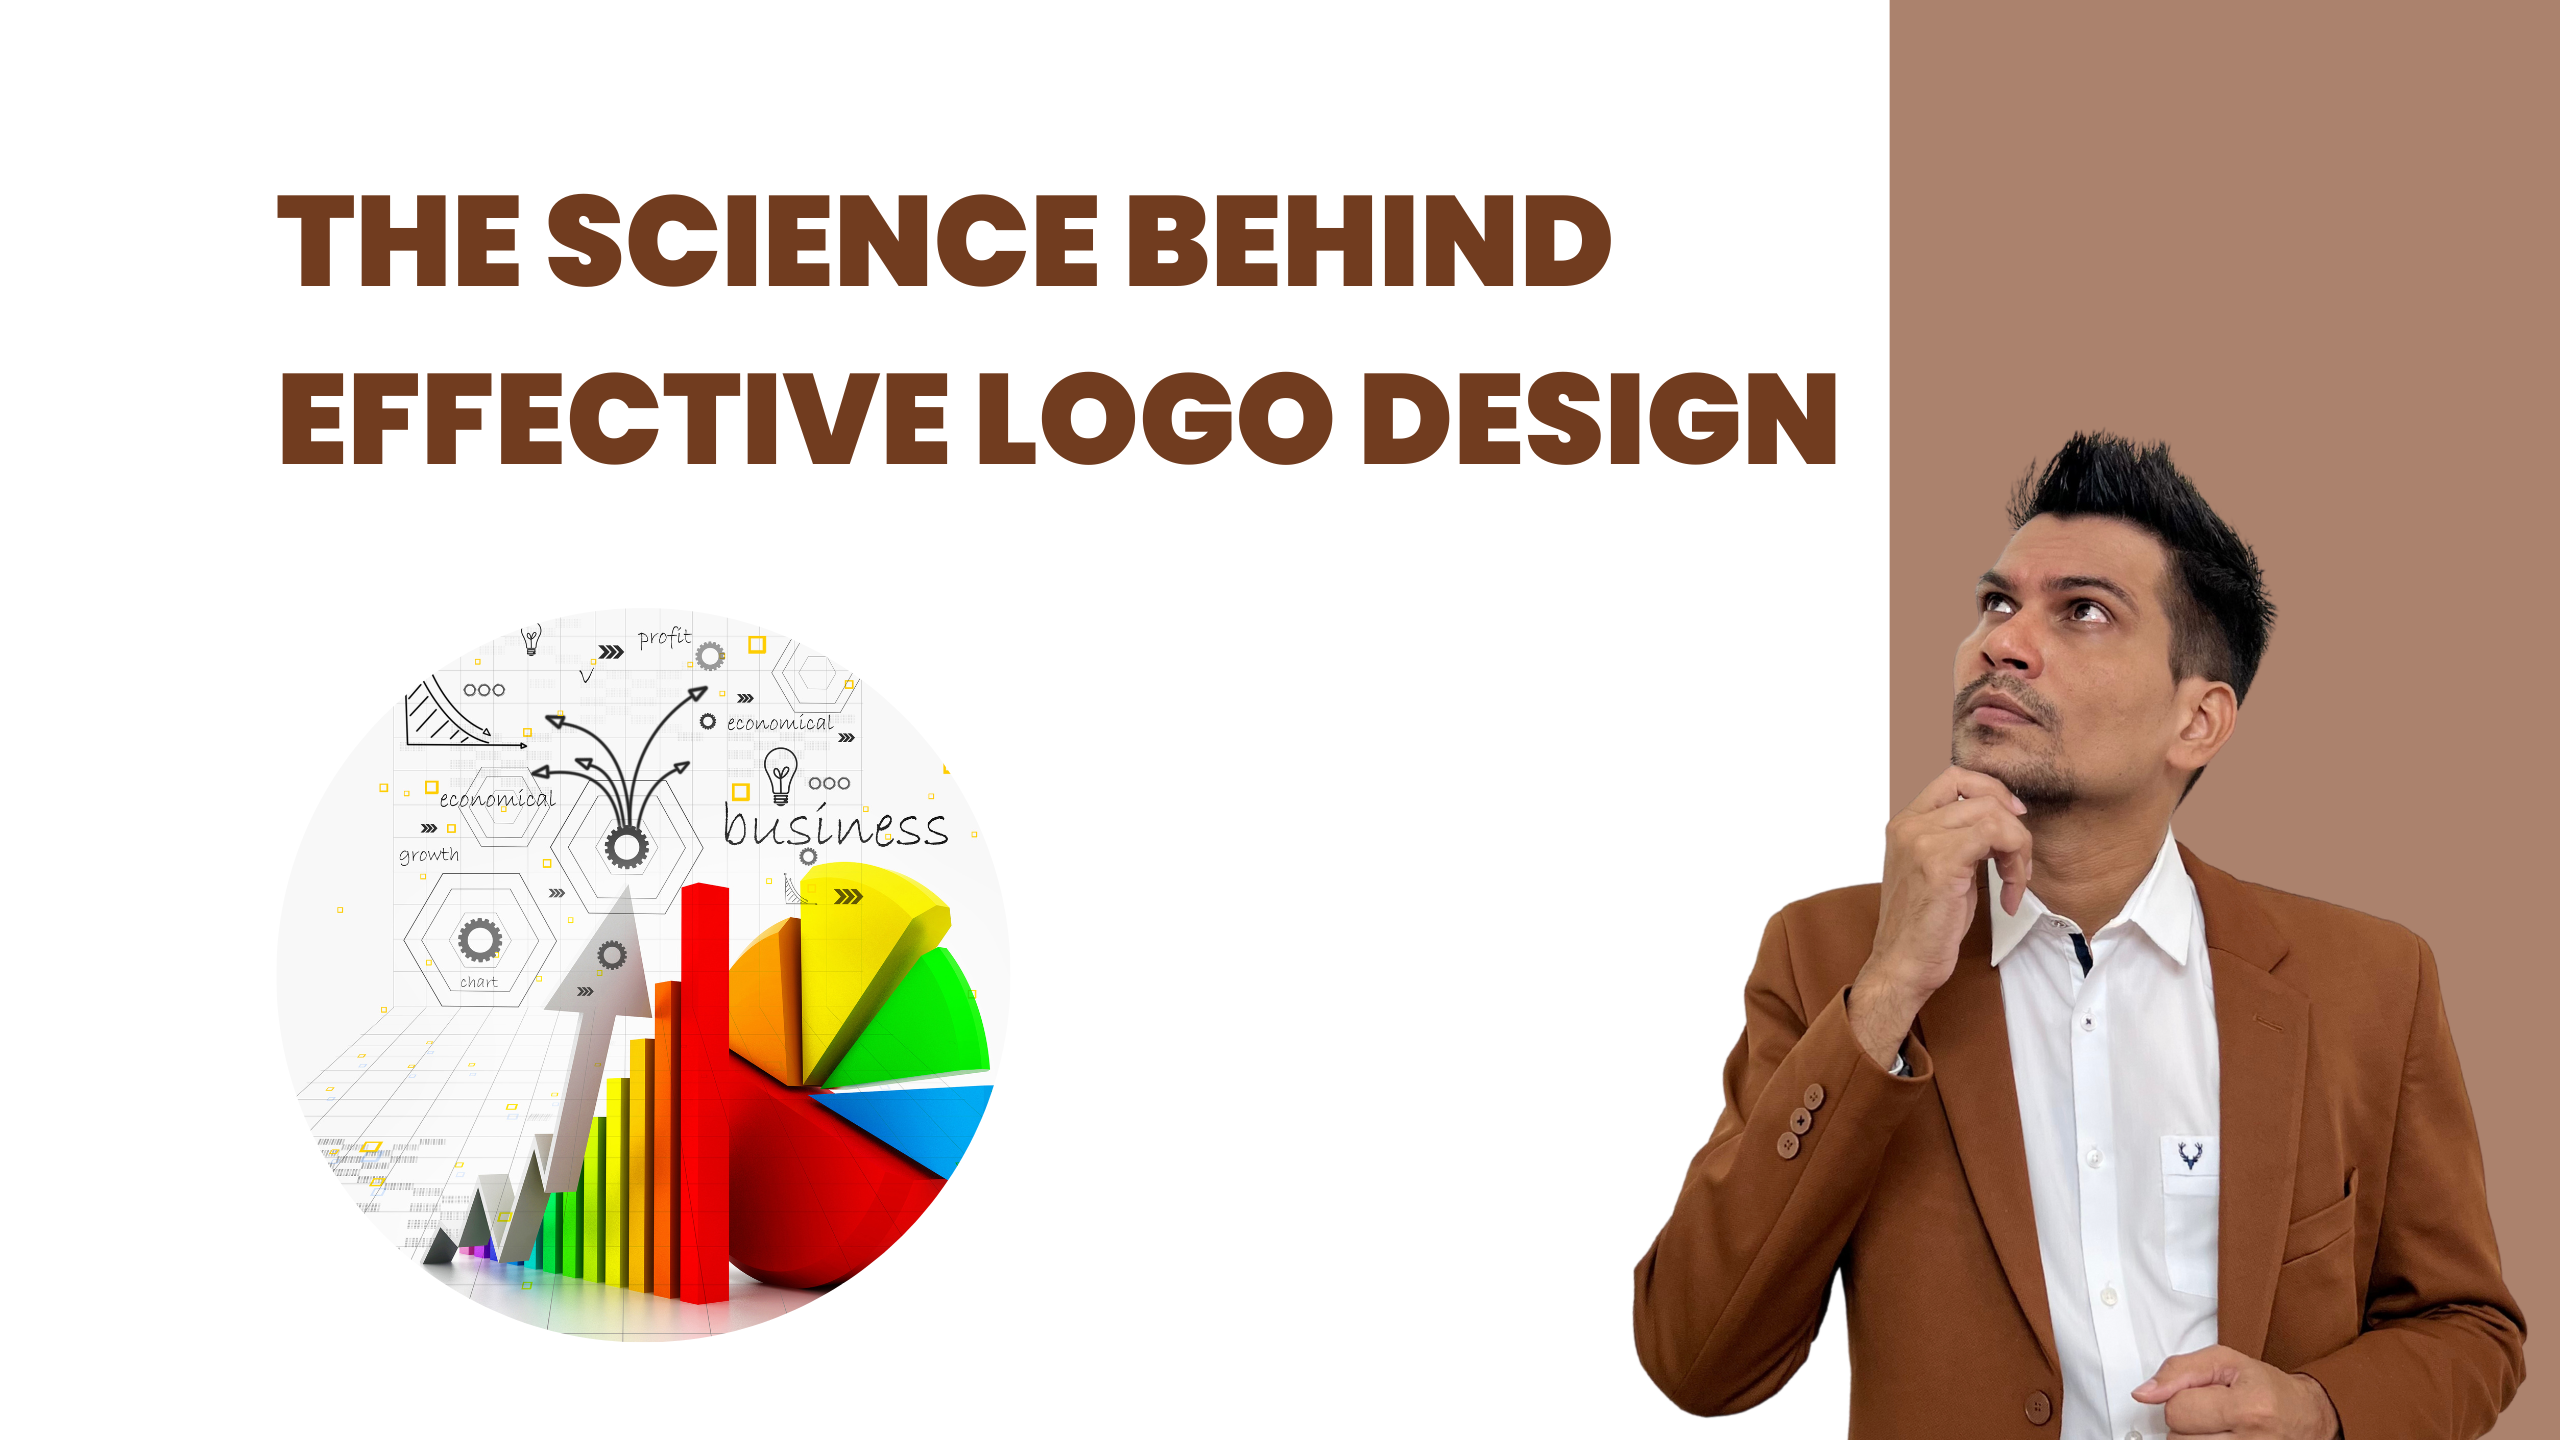 The Science Behind Effective Logo Design (2)